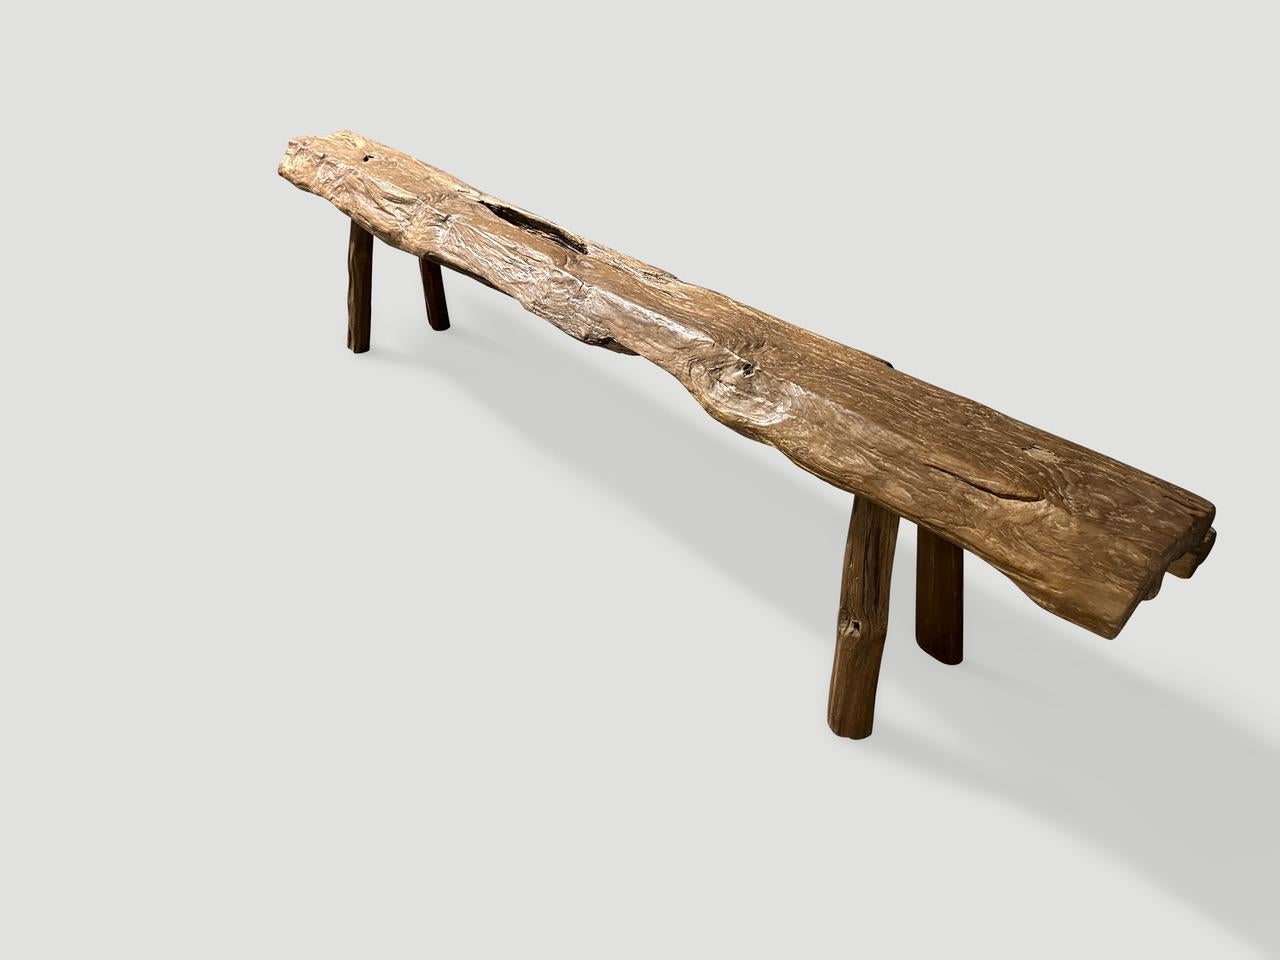 Impressive antique bench with beautiful character and patina hand made from a single four inch thick teak log. Circa 1950.

This bench was hand made in the spirit of Wabi-Sabi, a Japanese philosophy that beauty can be found in imperfection and